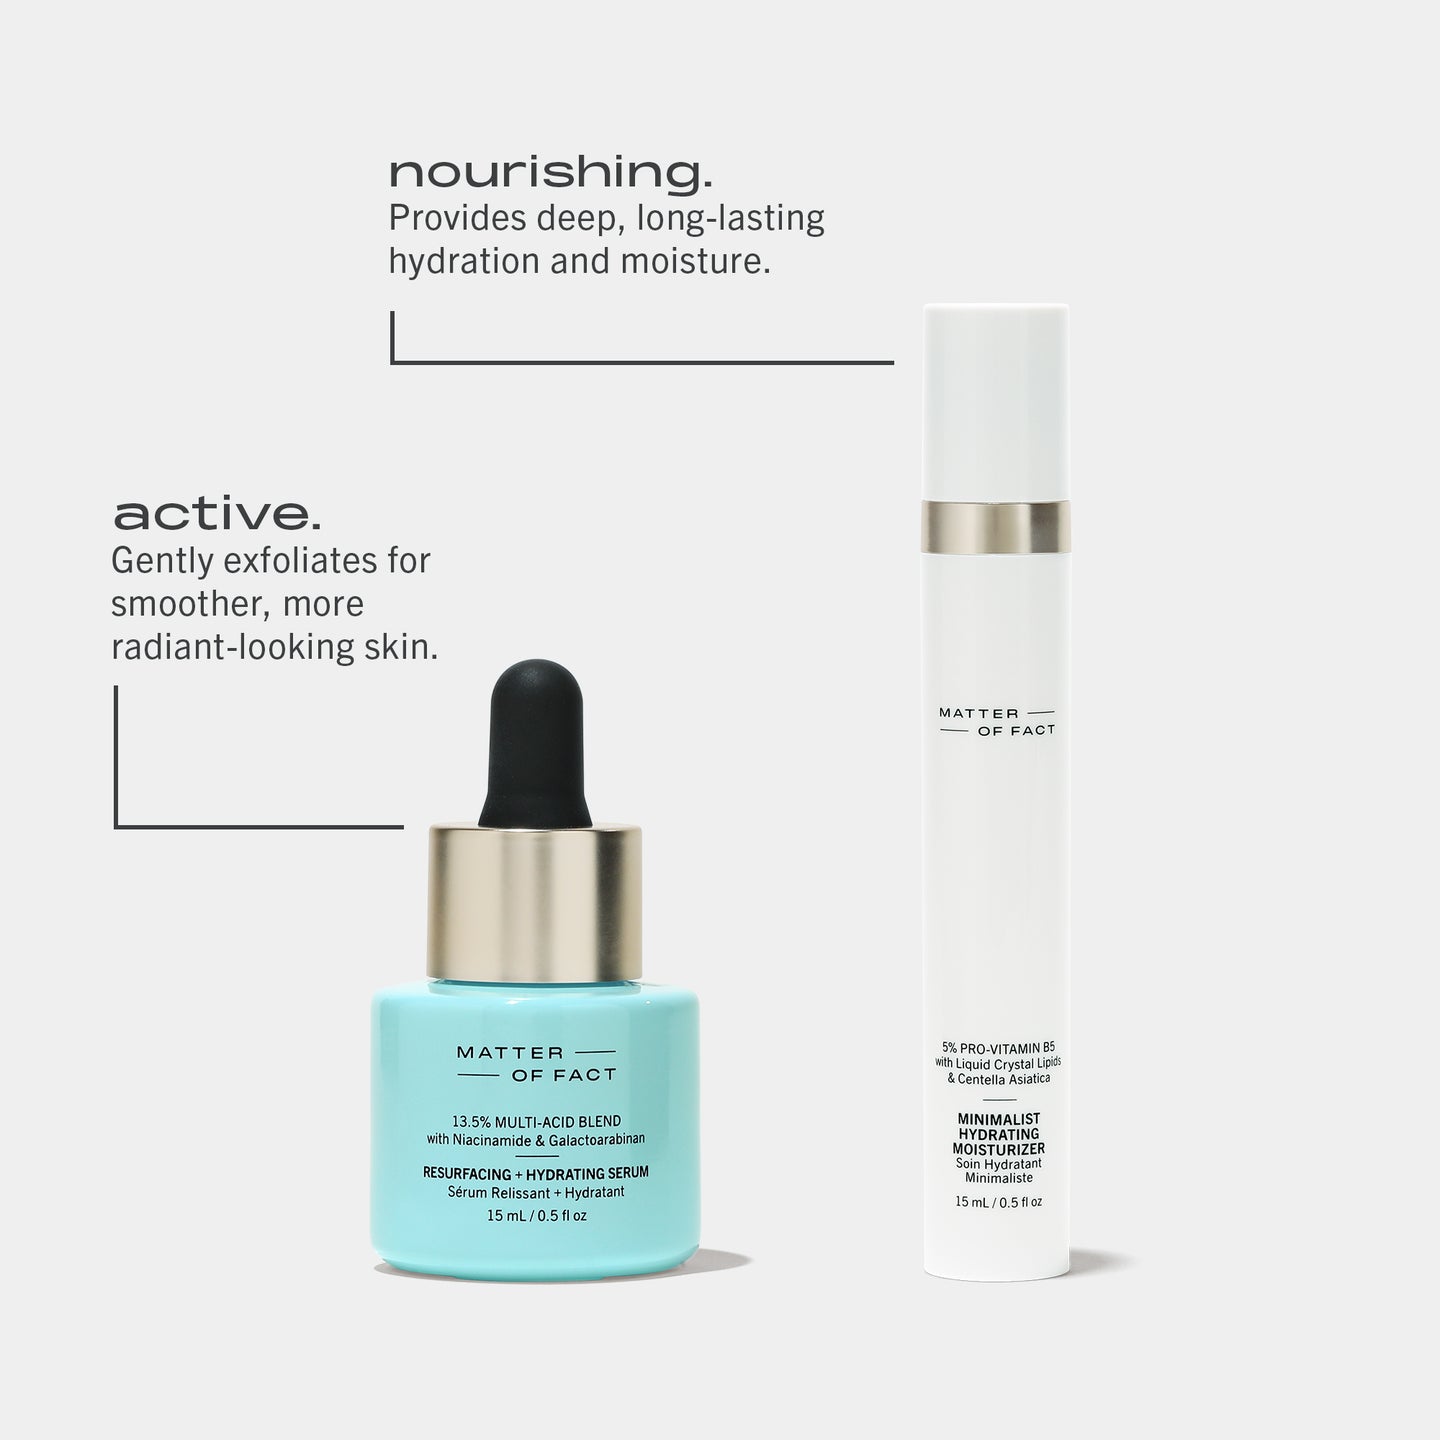 RESURFACING + HYDRATING SERUM travel size and MINIMALIST HYDRATING MOISTURIZER travel size highlighting the benefit of each product